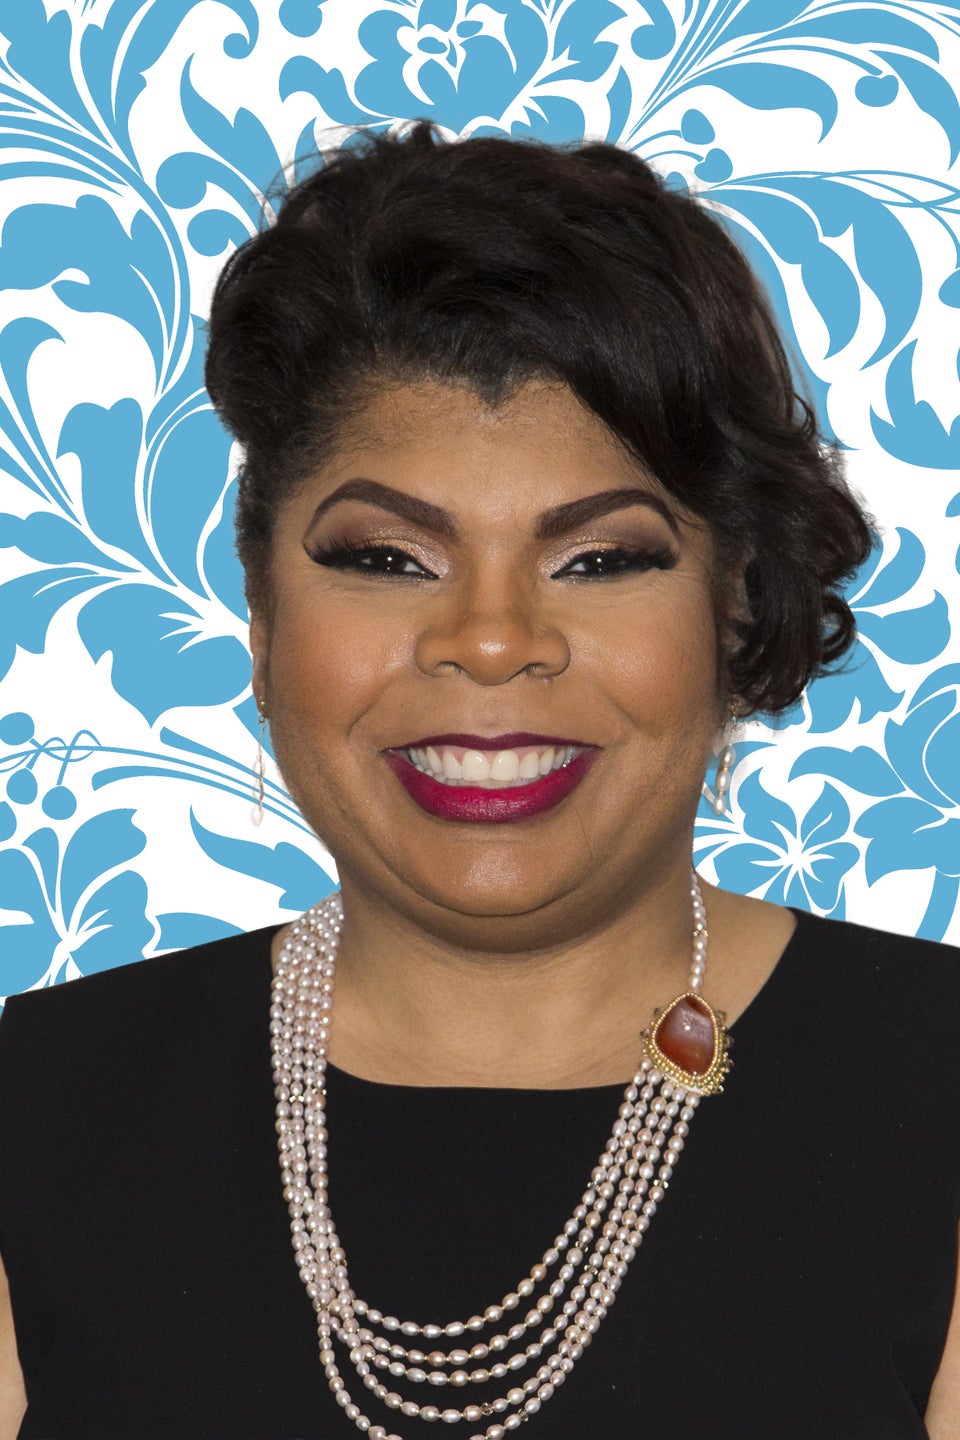 April Ryan Says A Colleague Told Her ‘The Only Reason You Get Called On Is Because You’re Black’